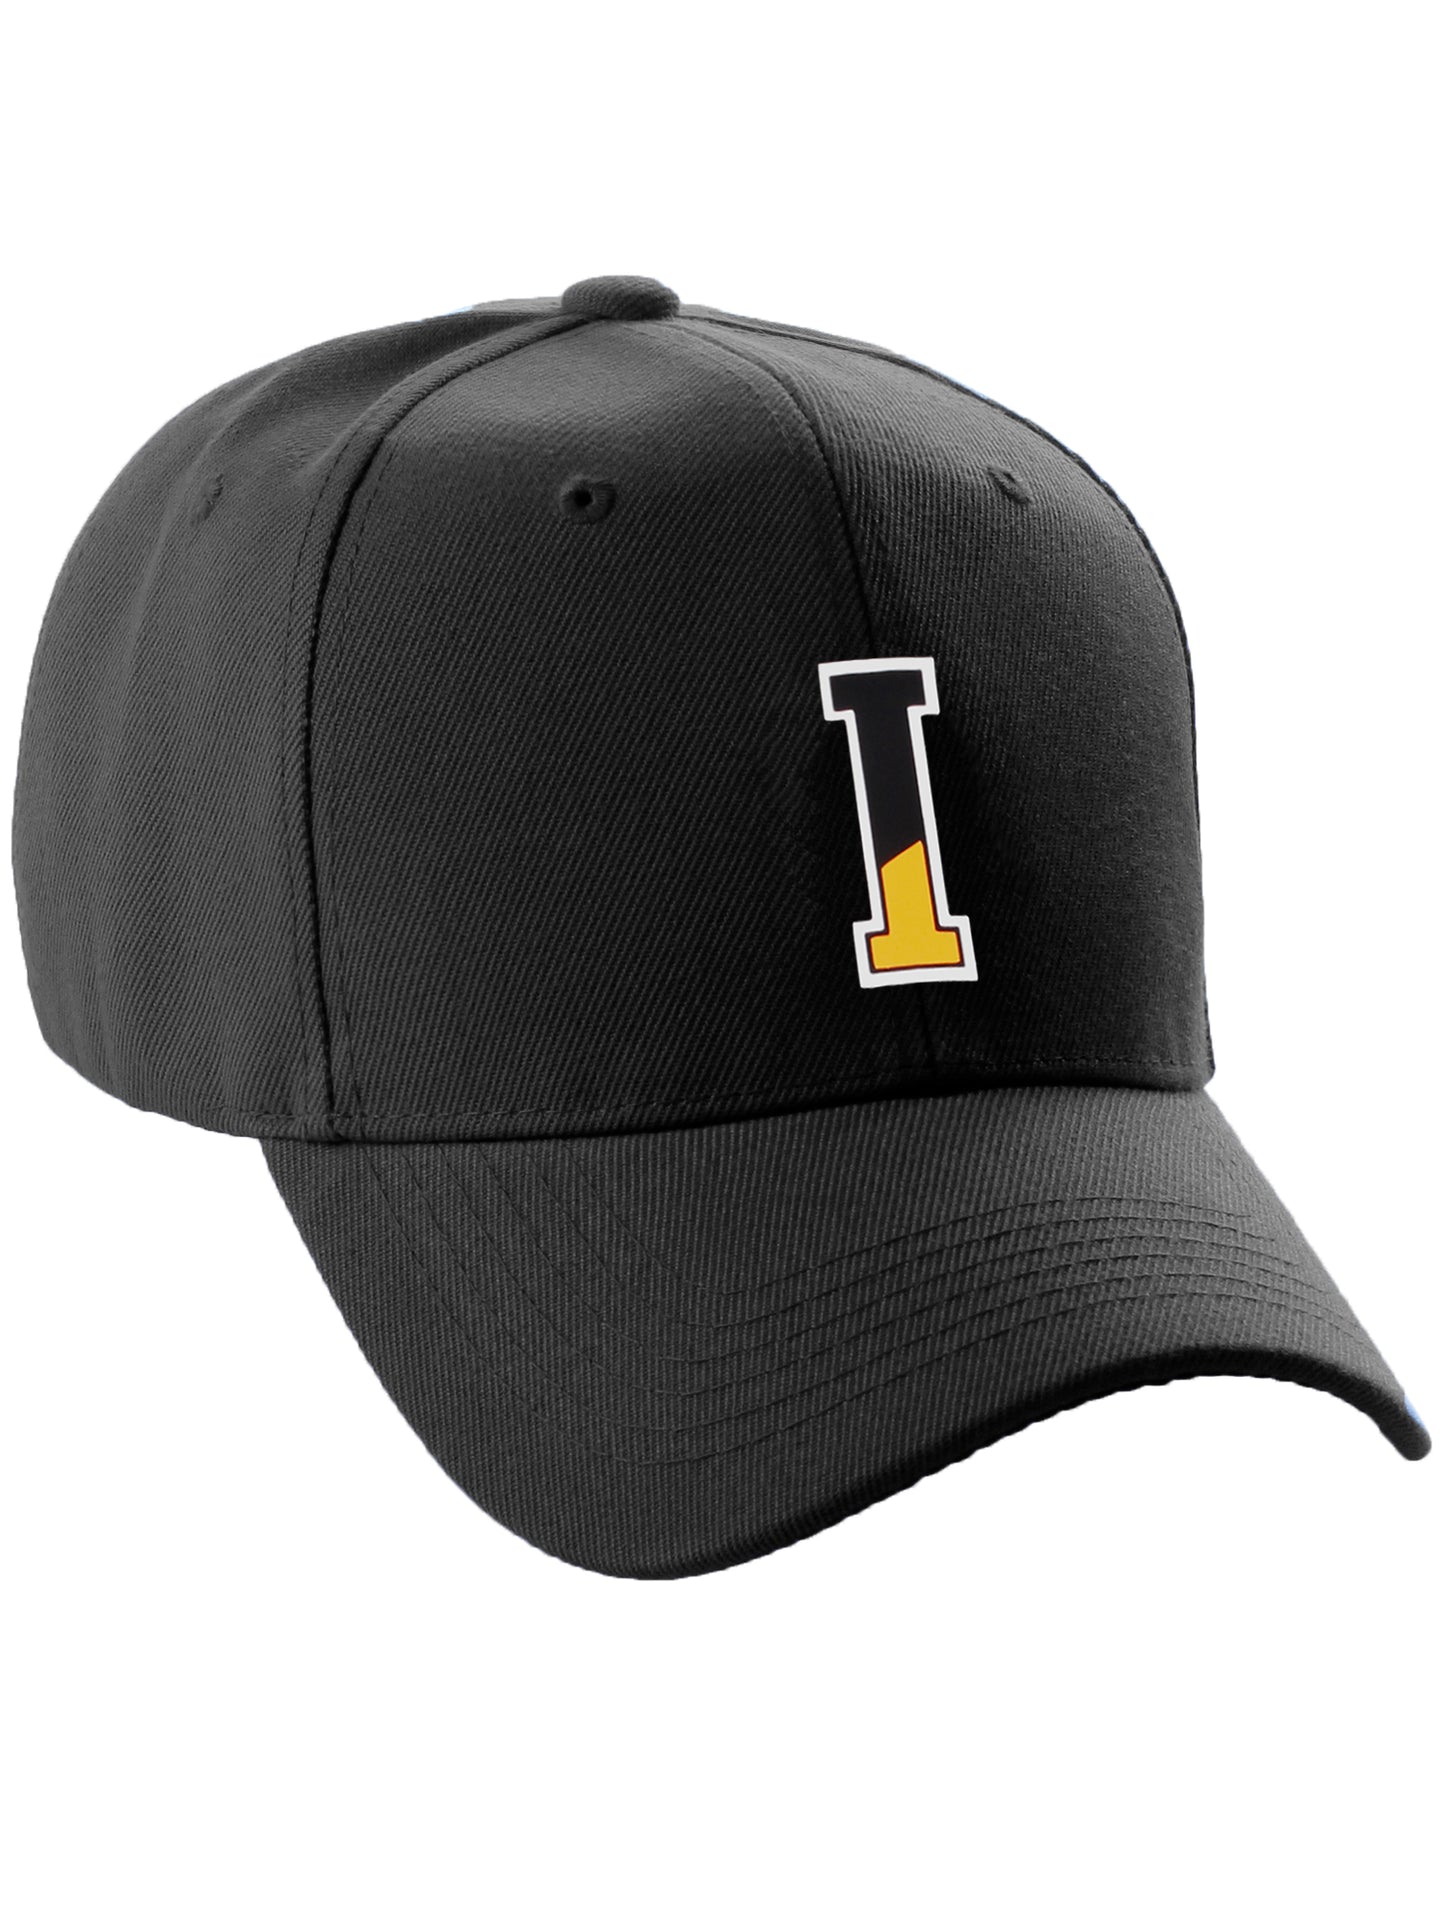 Daxton One Size Two Tone Initial Numbers Letters Structured Baseball Hat